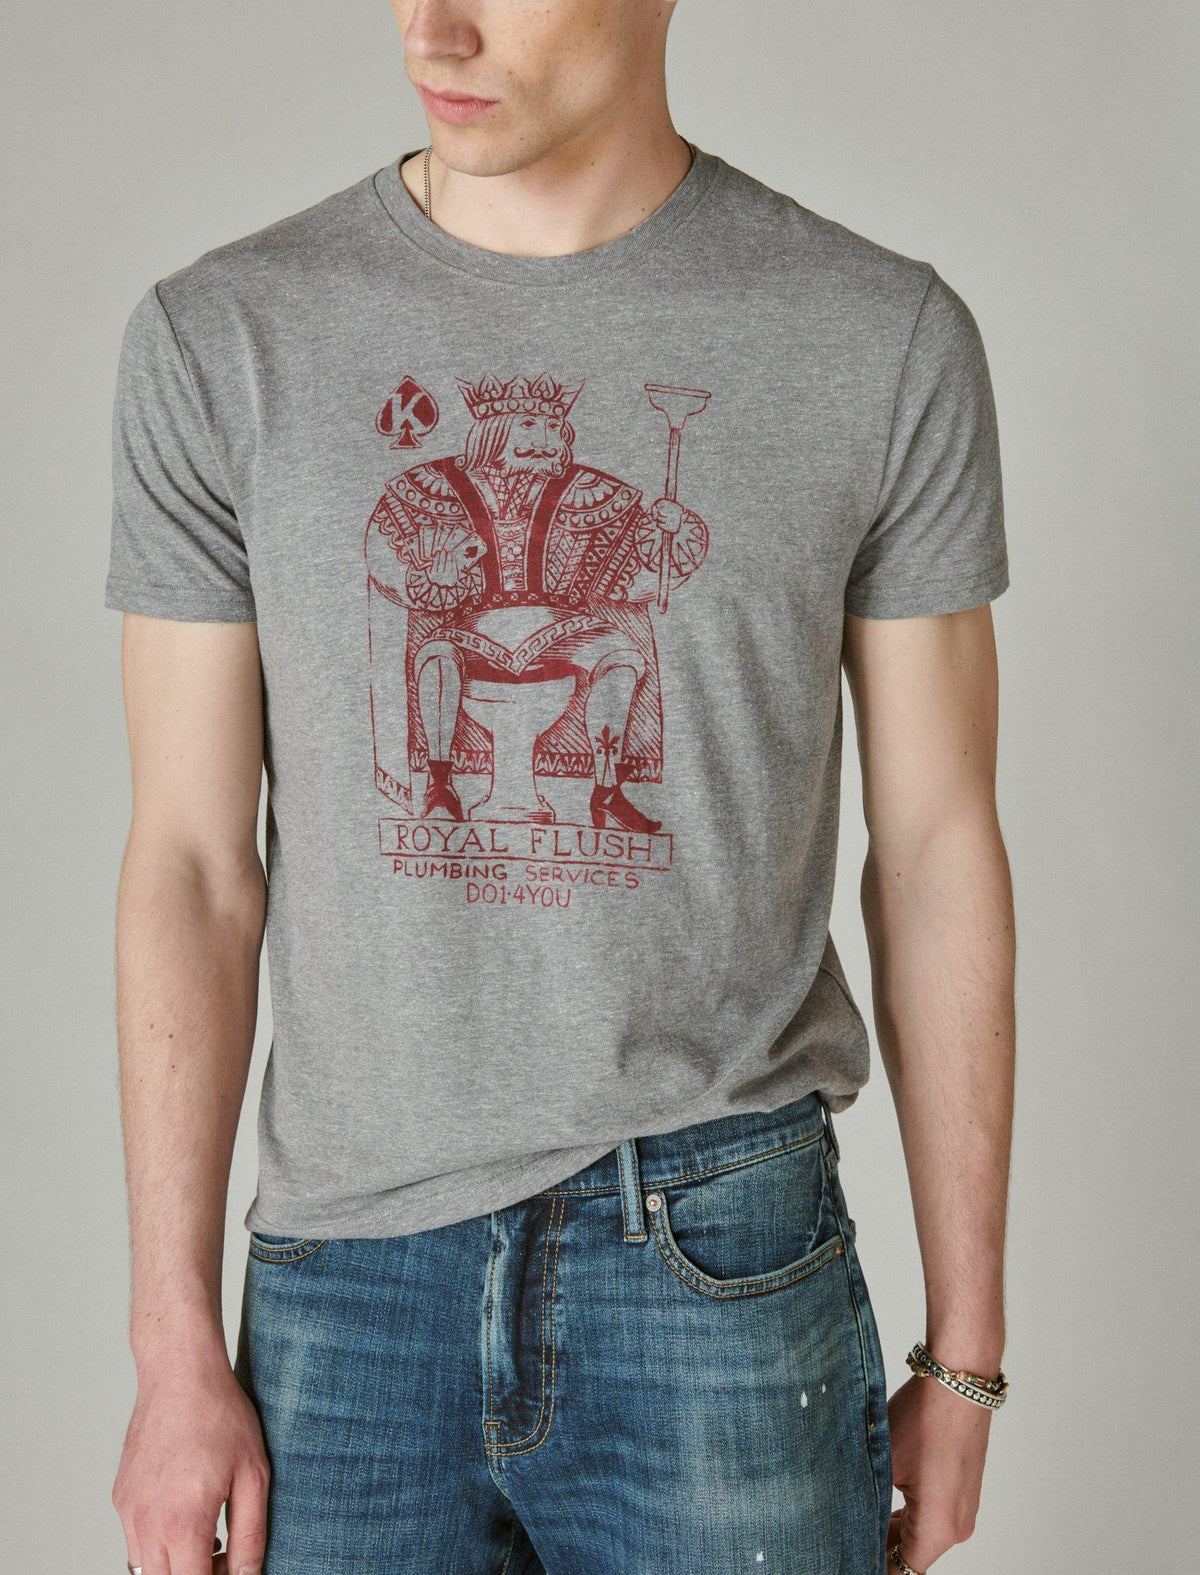 Lucky Brand Royal Flush Tee - Men's Clothing Tops Shirts Tee Graphic T Shirts Heather Grey